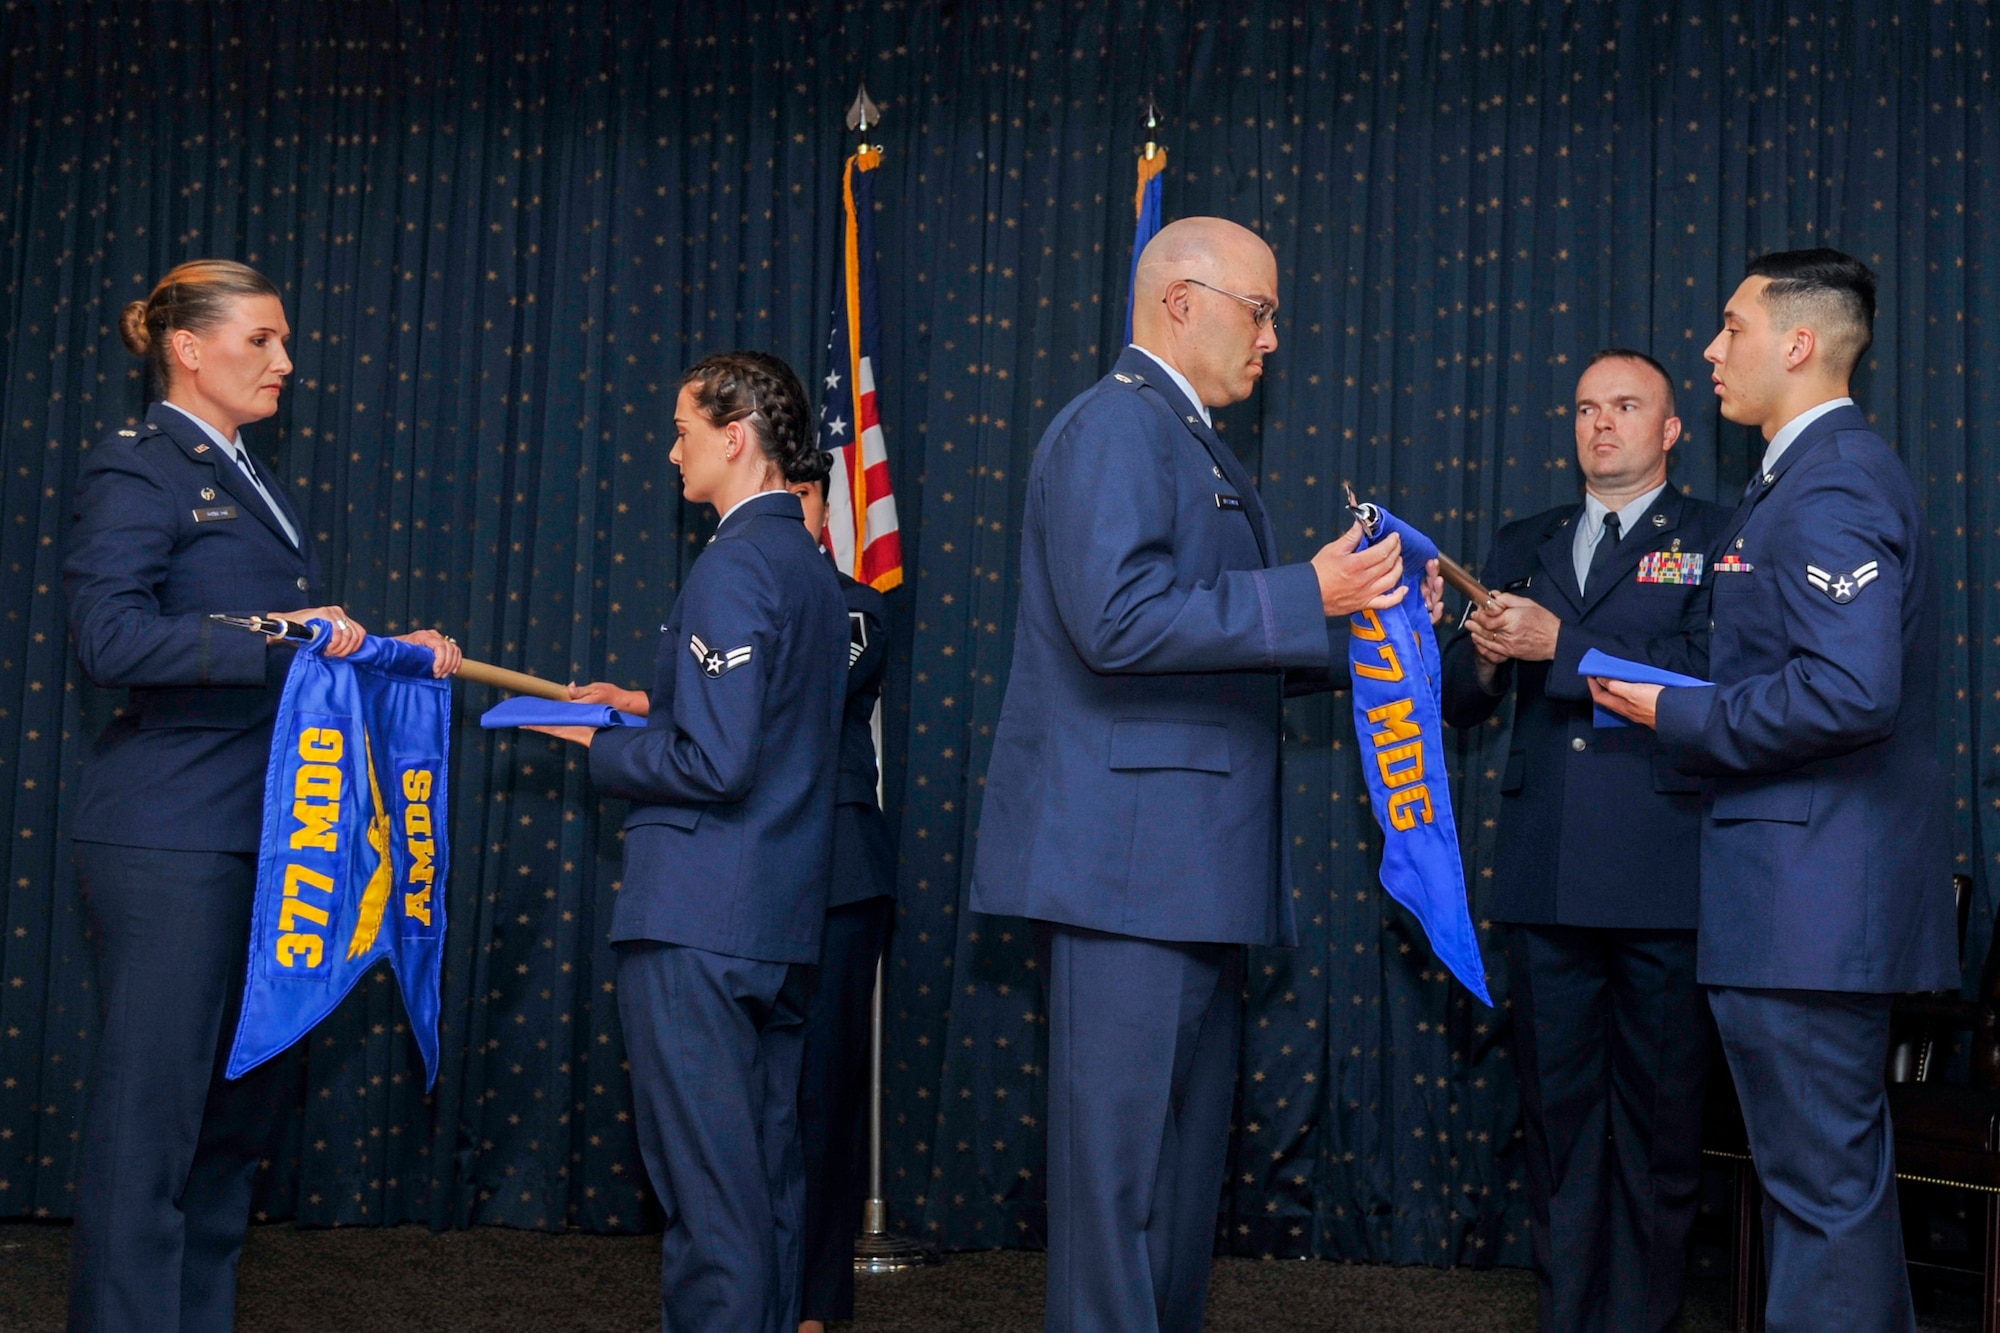 Guidons belonging to the 377th Aerospace Medicine Squadron and the 377th Medical Operations Squadron are furled in a redesignation ceremony at Kirtland Air Force Base, N.M., August 16, 2019. The 377th Aerospace Medicine Squadron and the 377th Medical Operations Squadron were redesignated to the 377th Operational Medical Readiness Squadron and the 377th Health Care Operations Squadron. (U.S. Air Force photo by Airman 1st Class Austin J. Prisbrey)